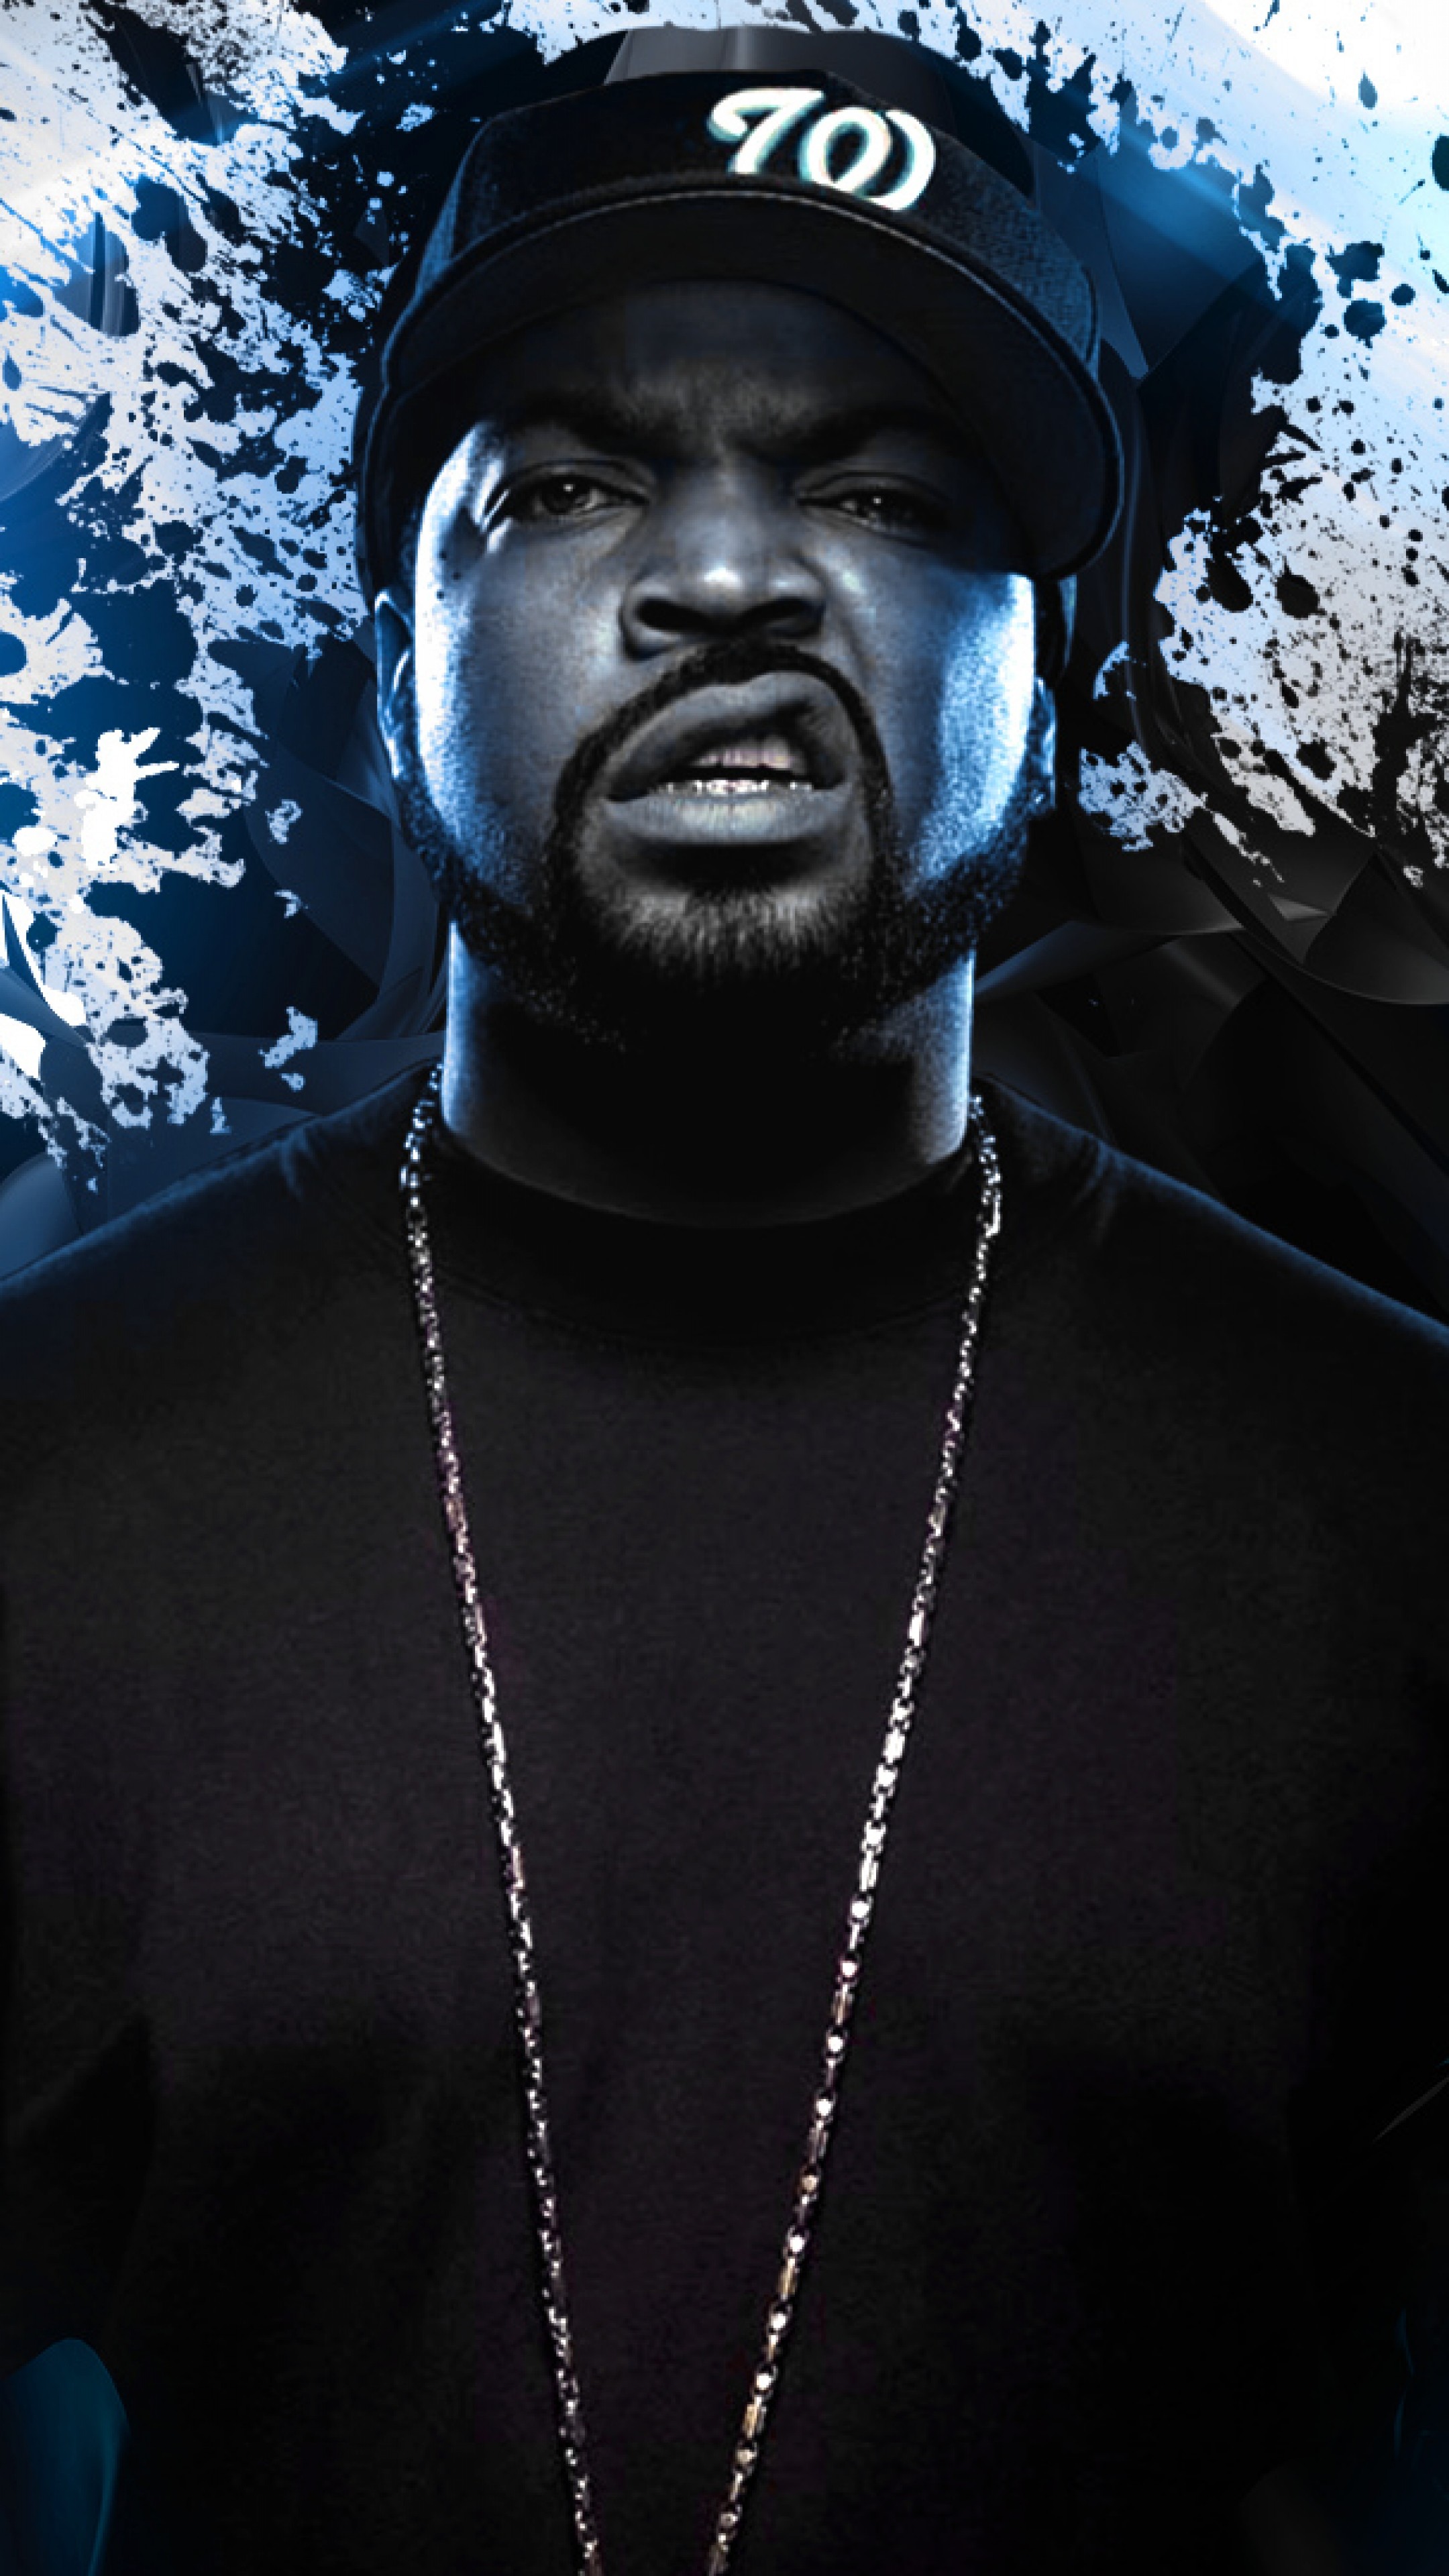 2160x3840  Wallpaper ice cube, rapper, musician, abstraction